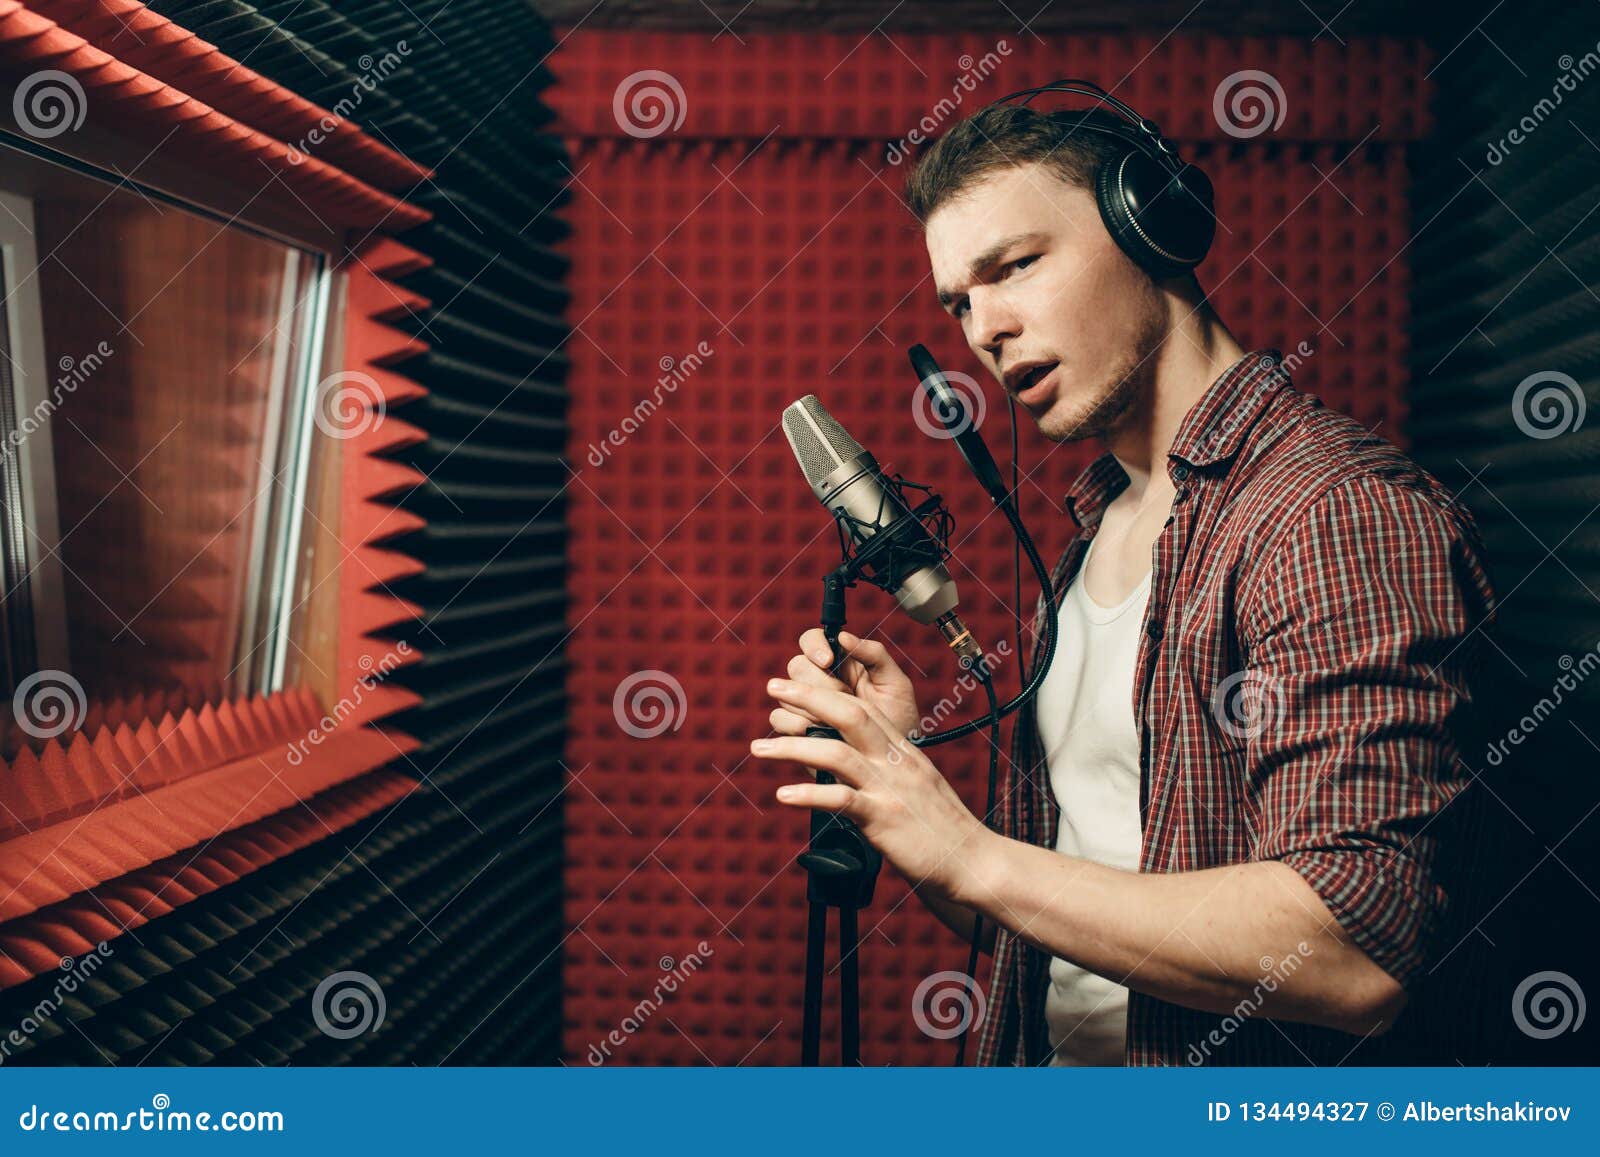 Woman Singing Into Microphone Stock Photos - FreeImages.com